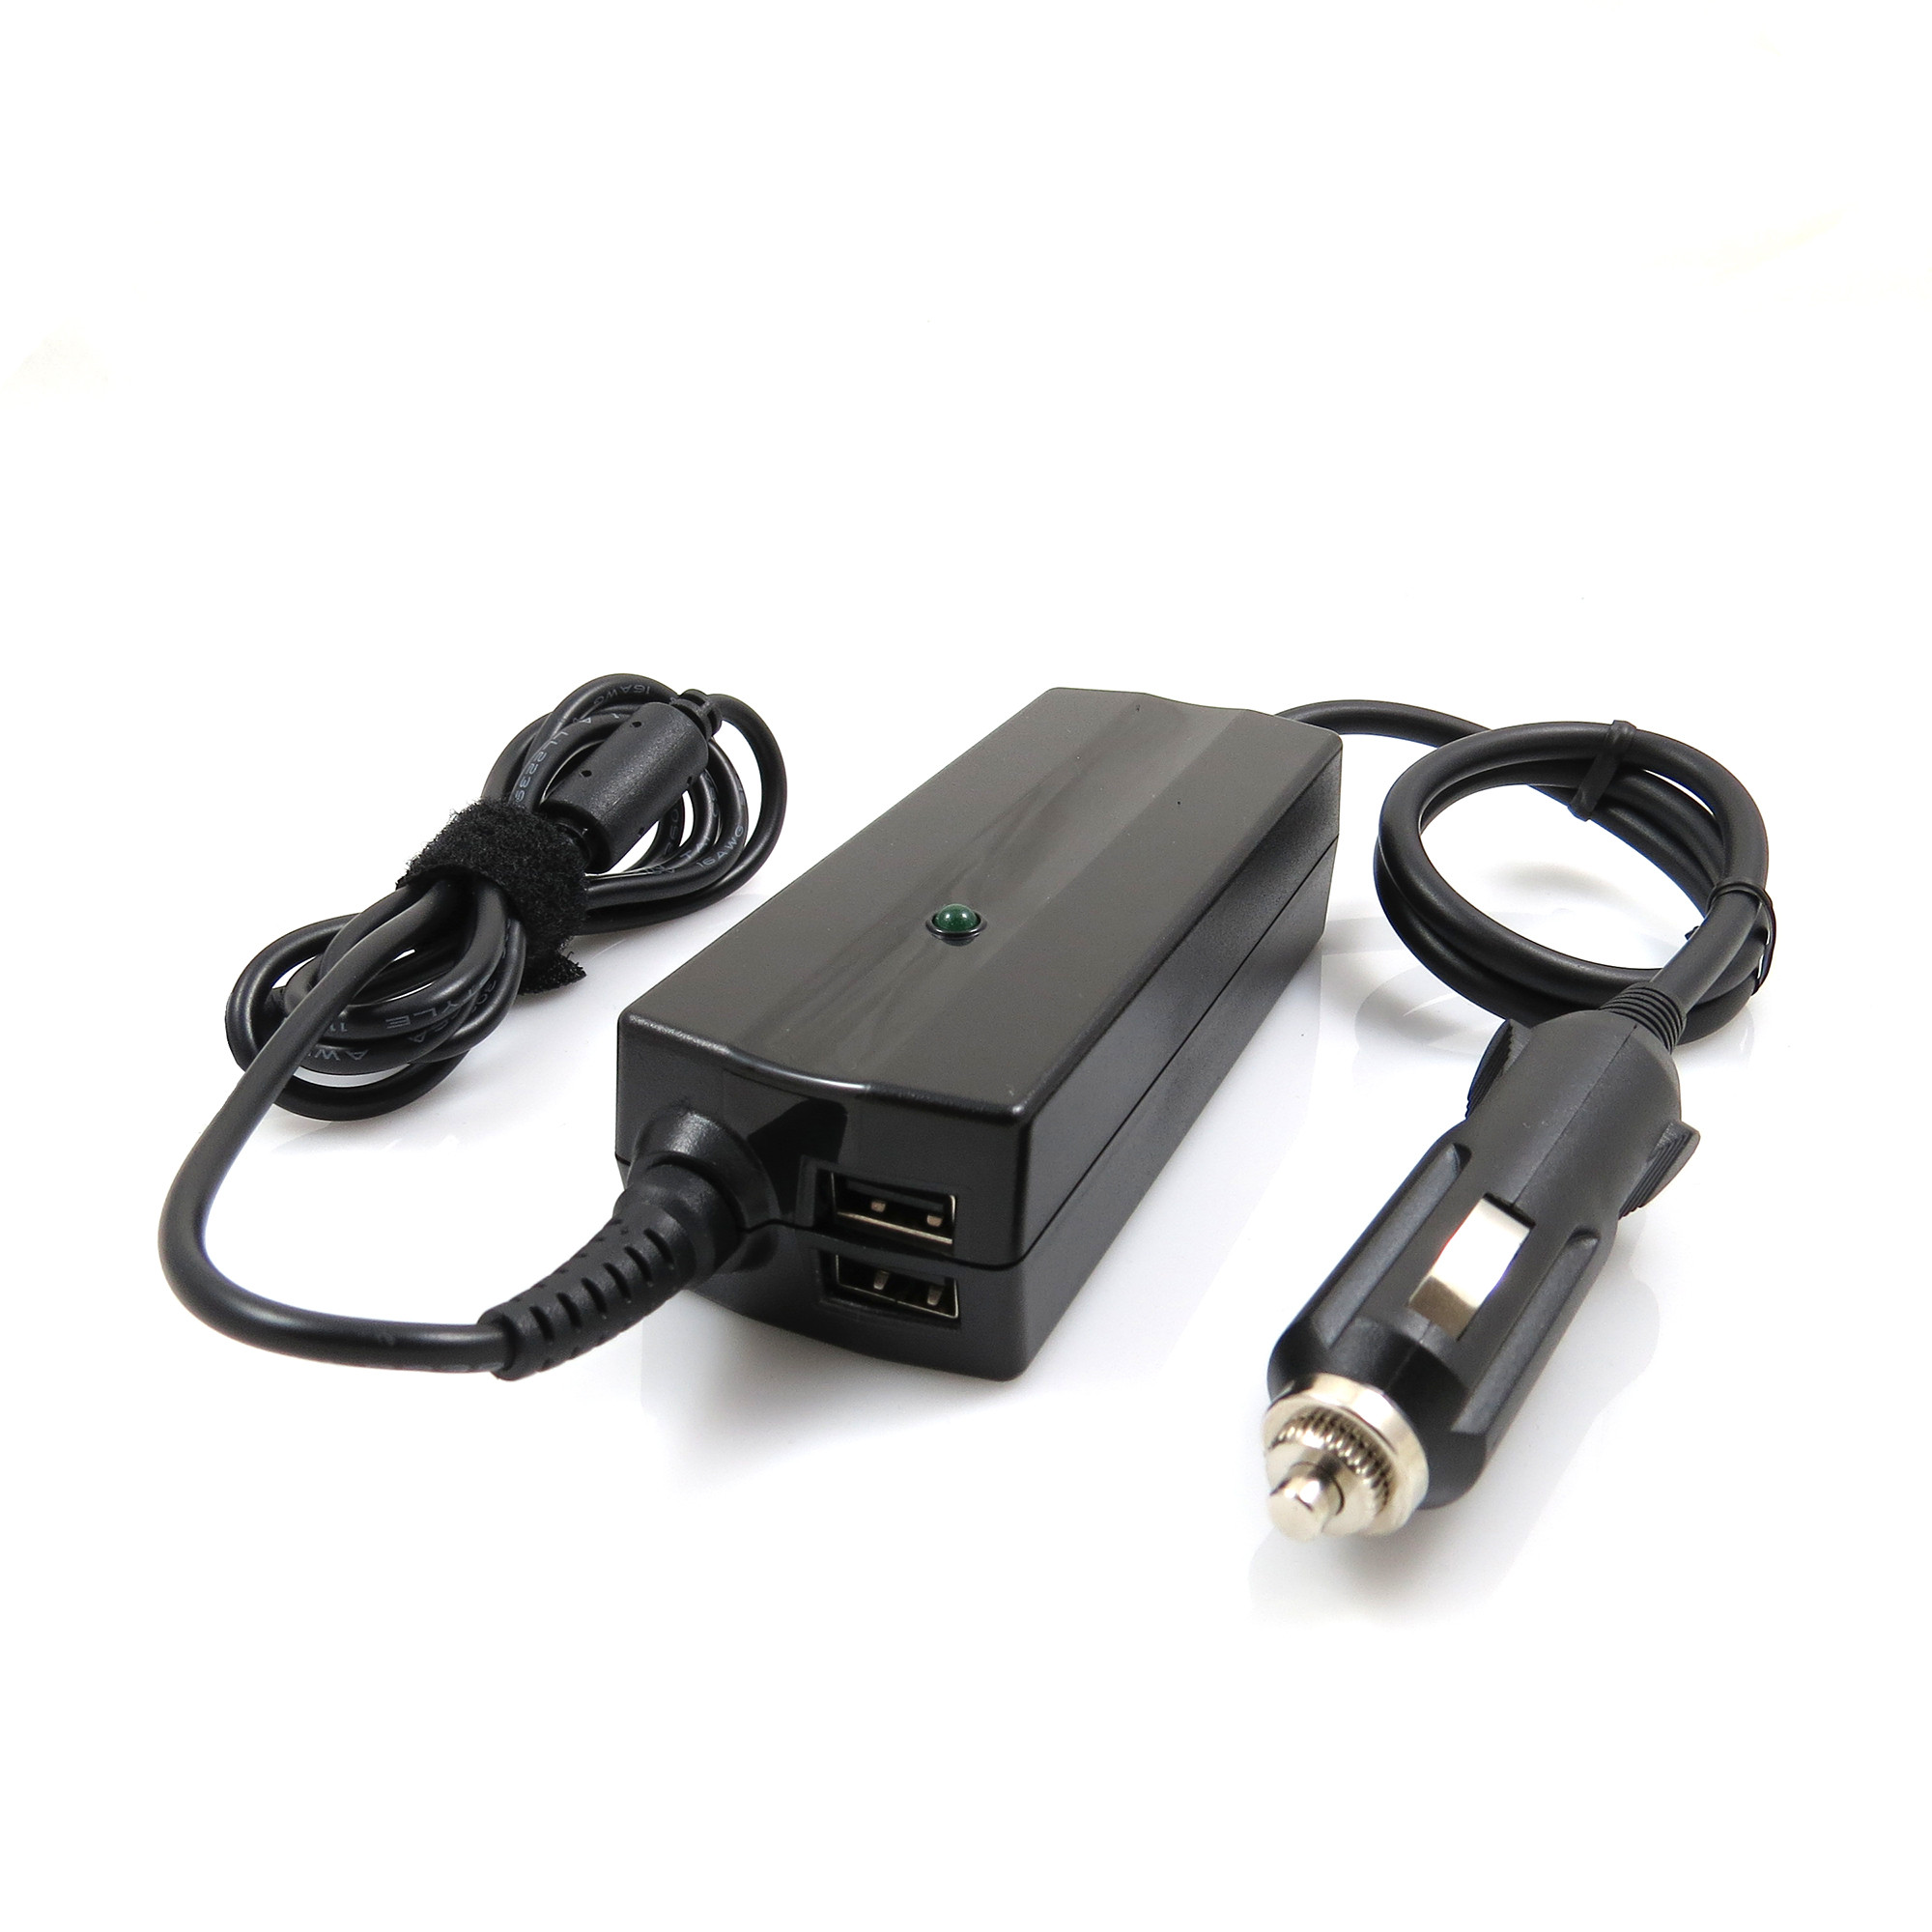 Car Charger for Panasonic Toughbook Cf-18 Cf-19 Cf-p1 Cf-r1 Cf-r2 Cf-t1 Cf-t2 Cf-t4 Cf-t5 Cf-w2 Cf-w2a Cf-w2d Battery Power Supply Cord - image 2 of 2